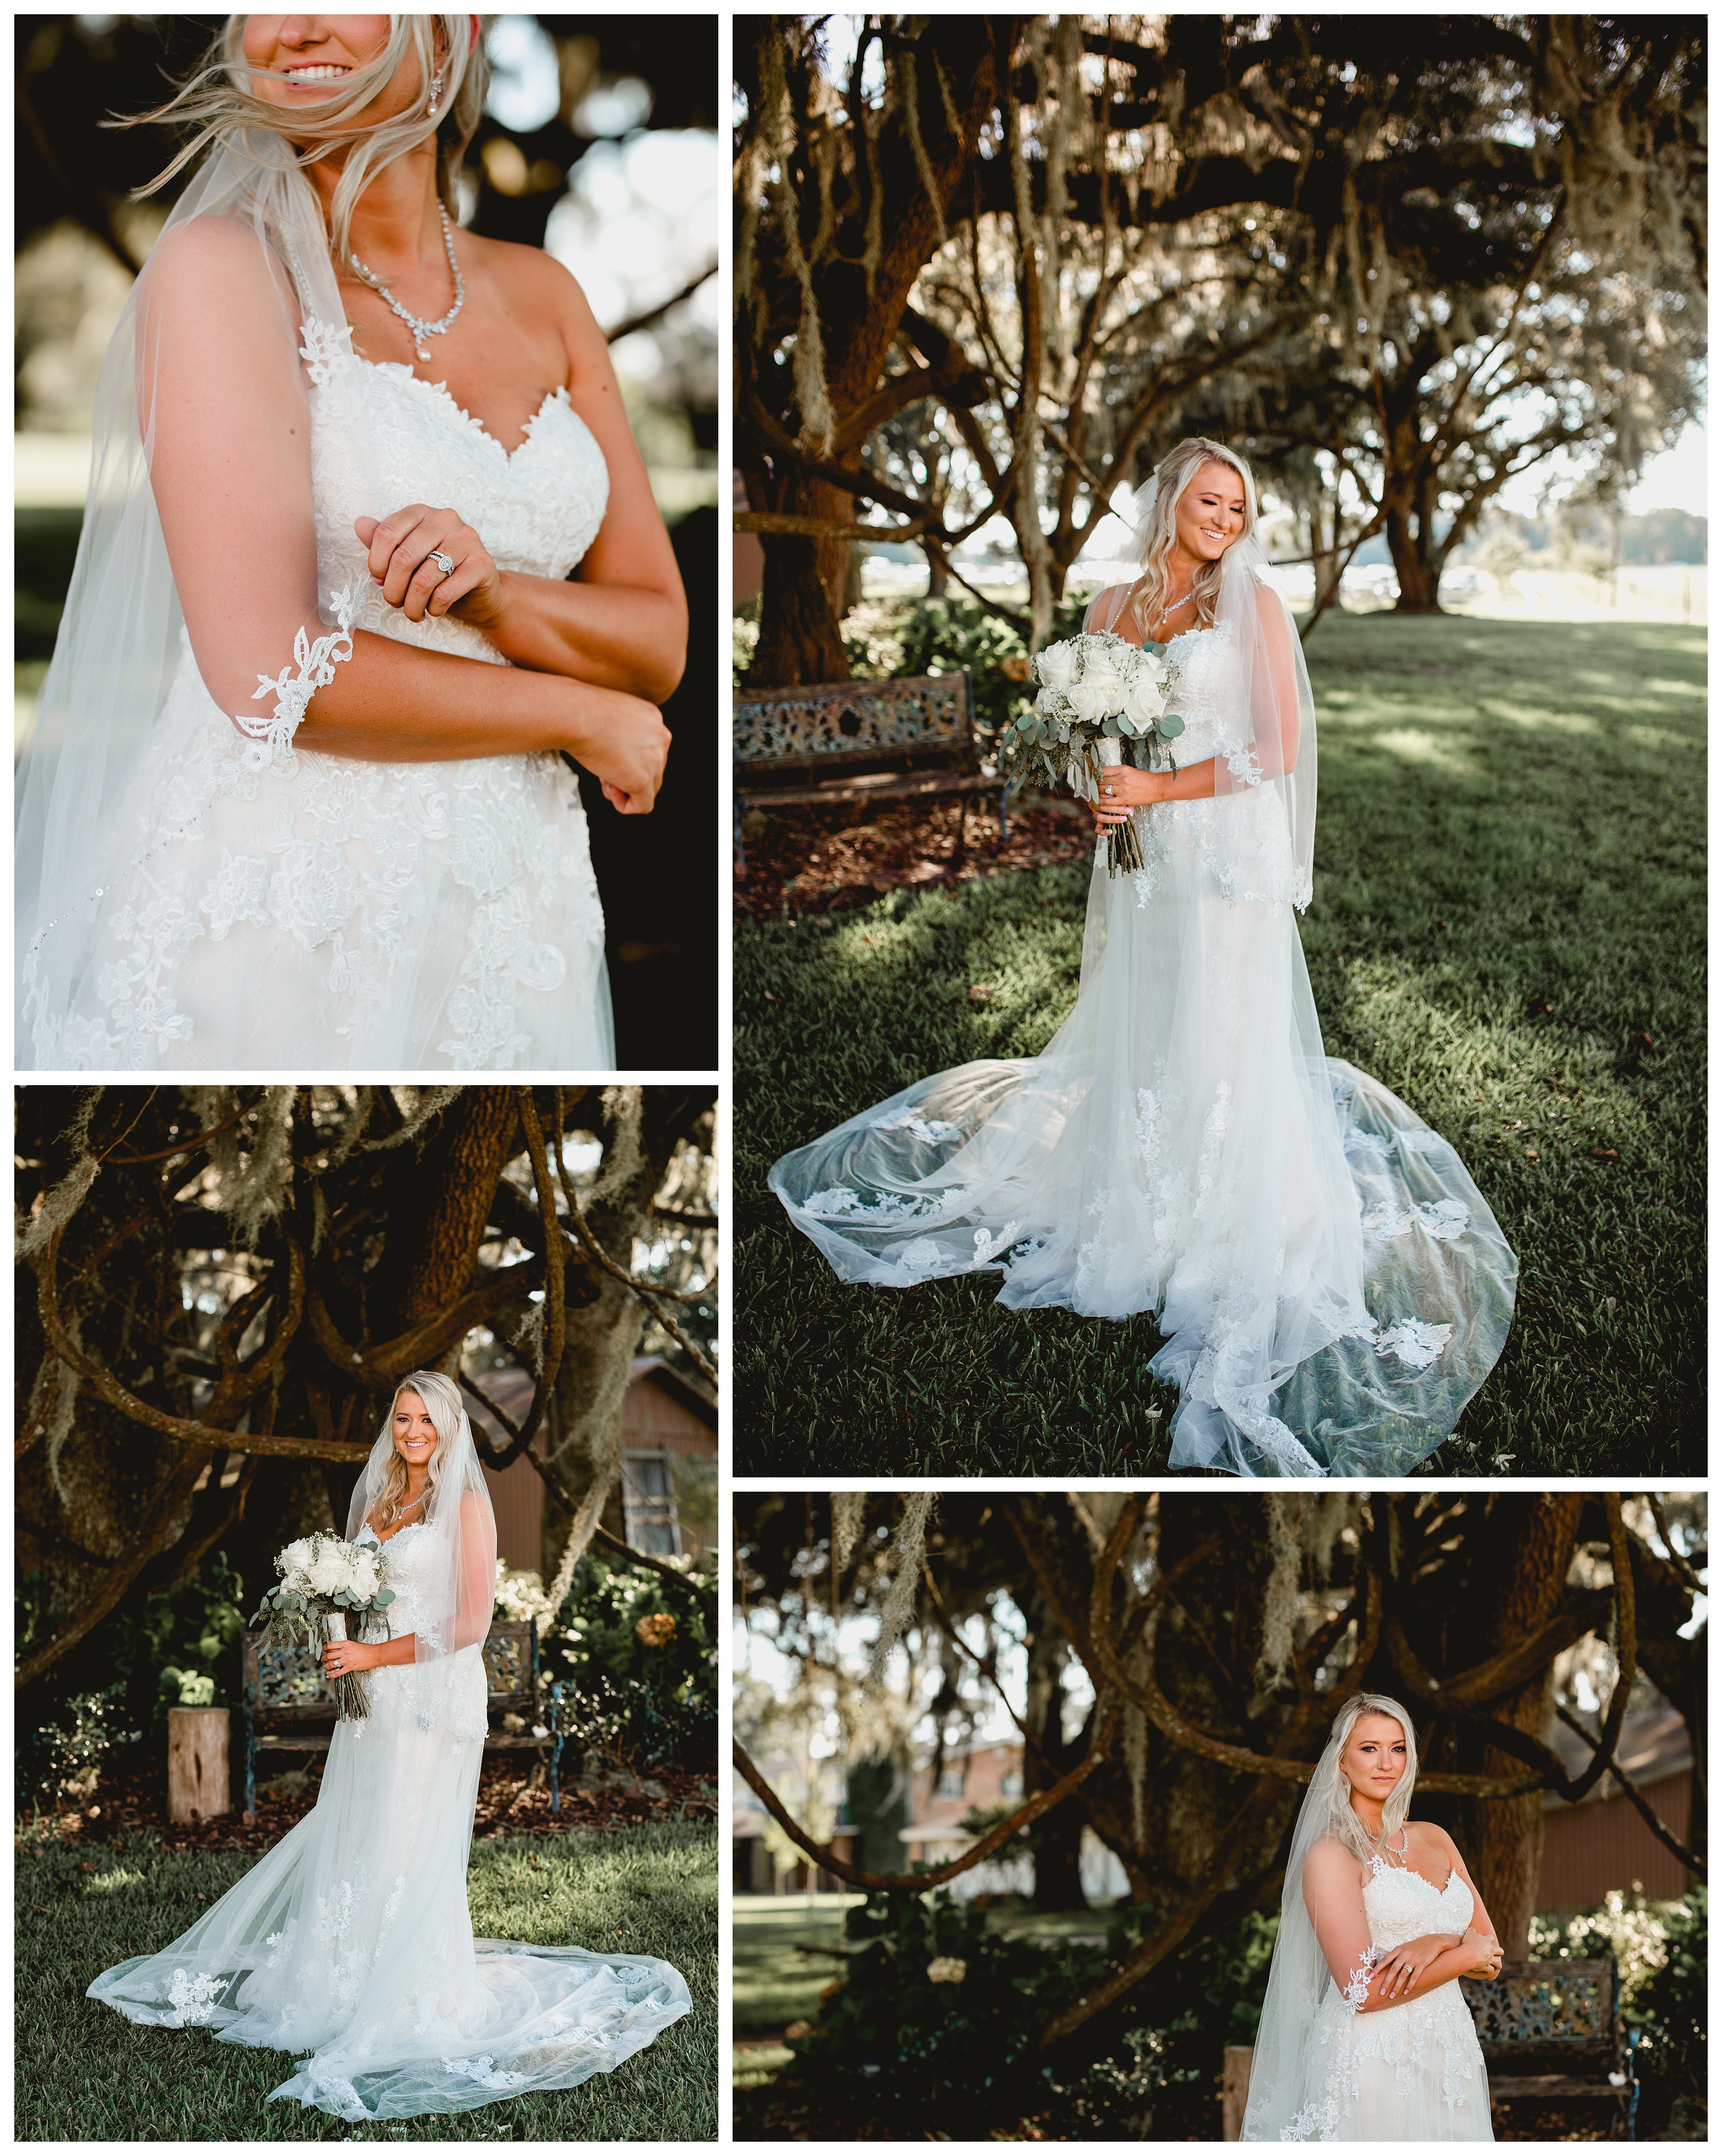 Bridal portraits by professional wedding photographer in Tallahassee, FL. Shelly Williams Photography